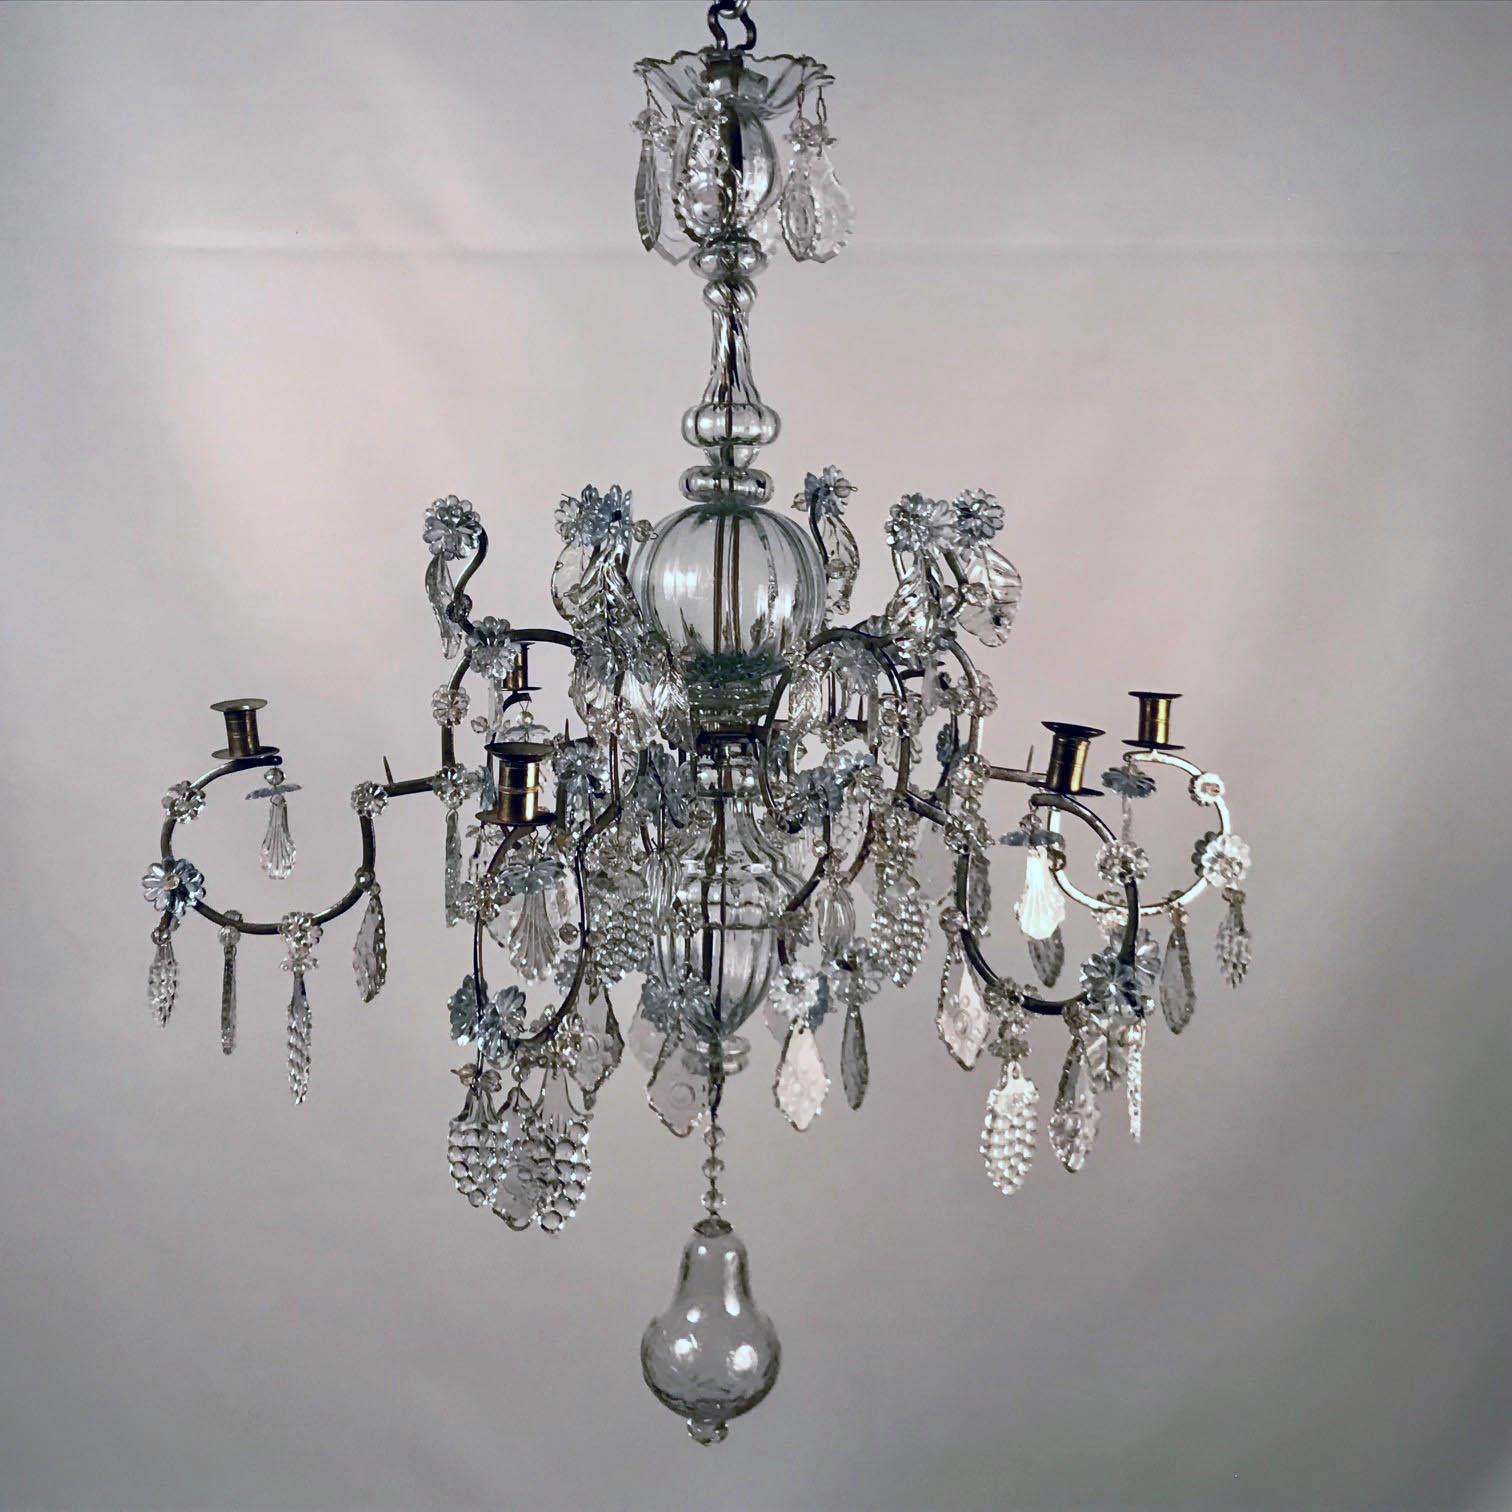 Scandinavian Baltic 18th Century Crystal and Iron Candle Chandelier For Sale